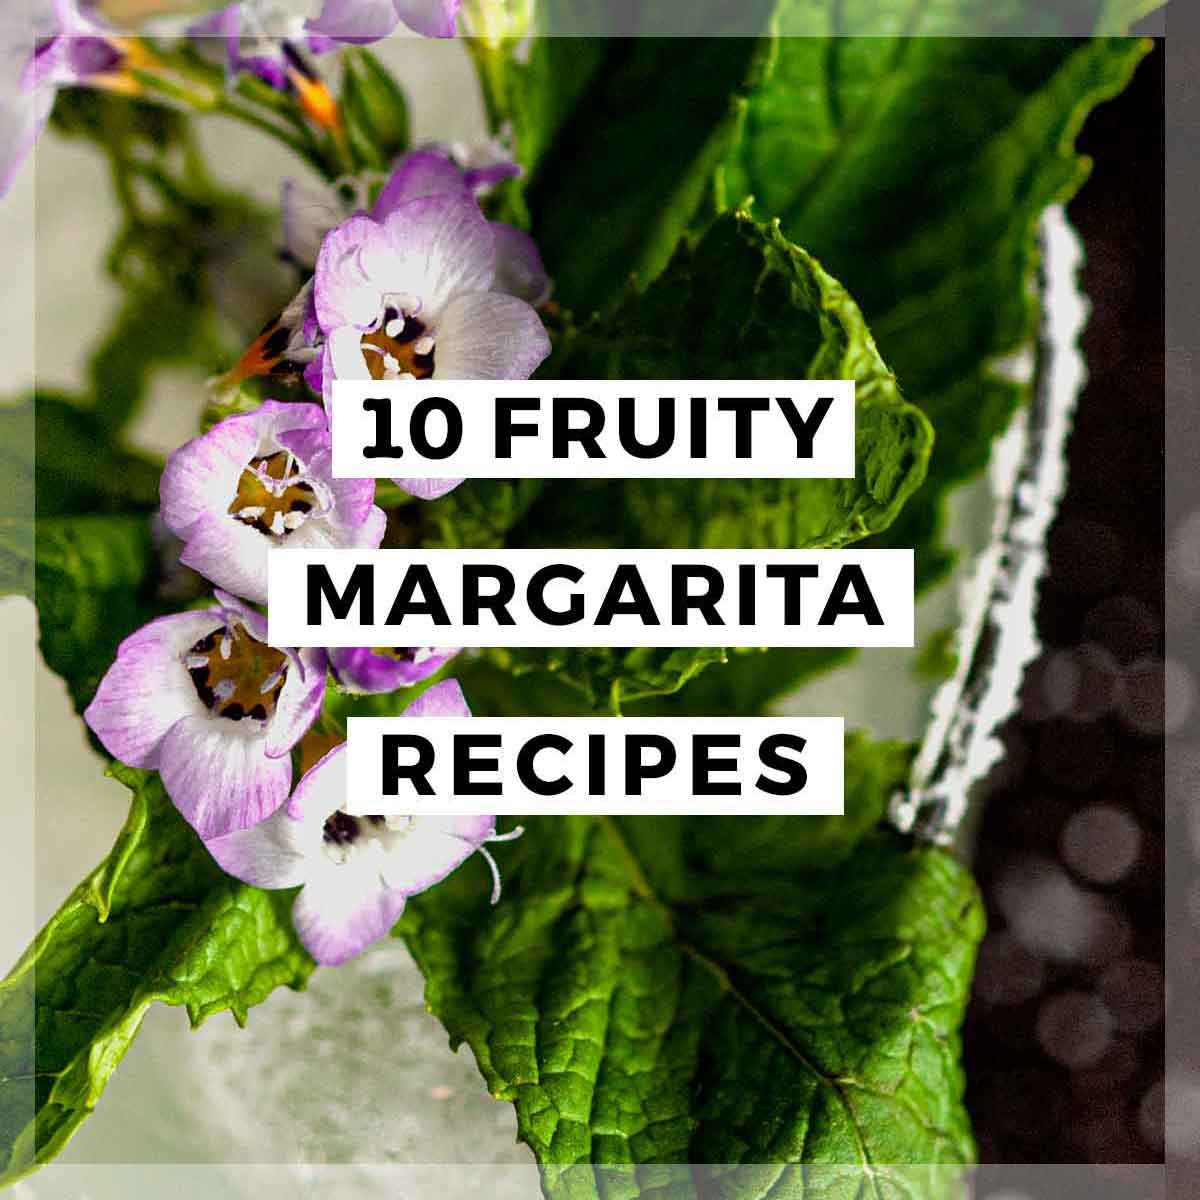 The floral and mint garnish on a margarita with a title that says "10 Fruity Margarita Recipes."